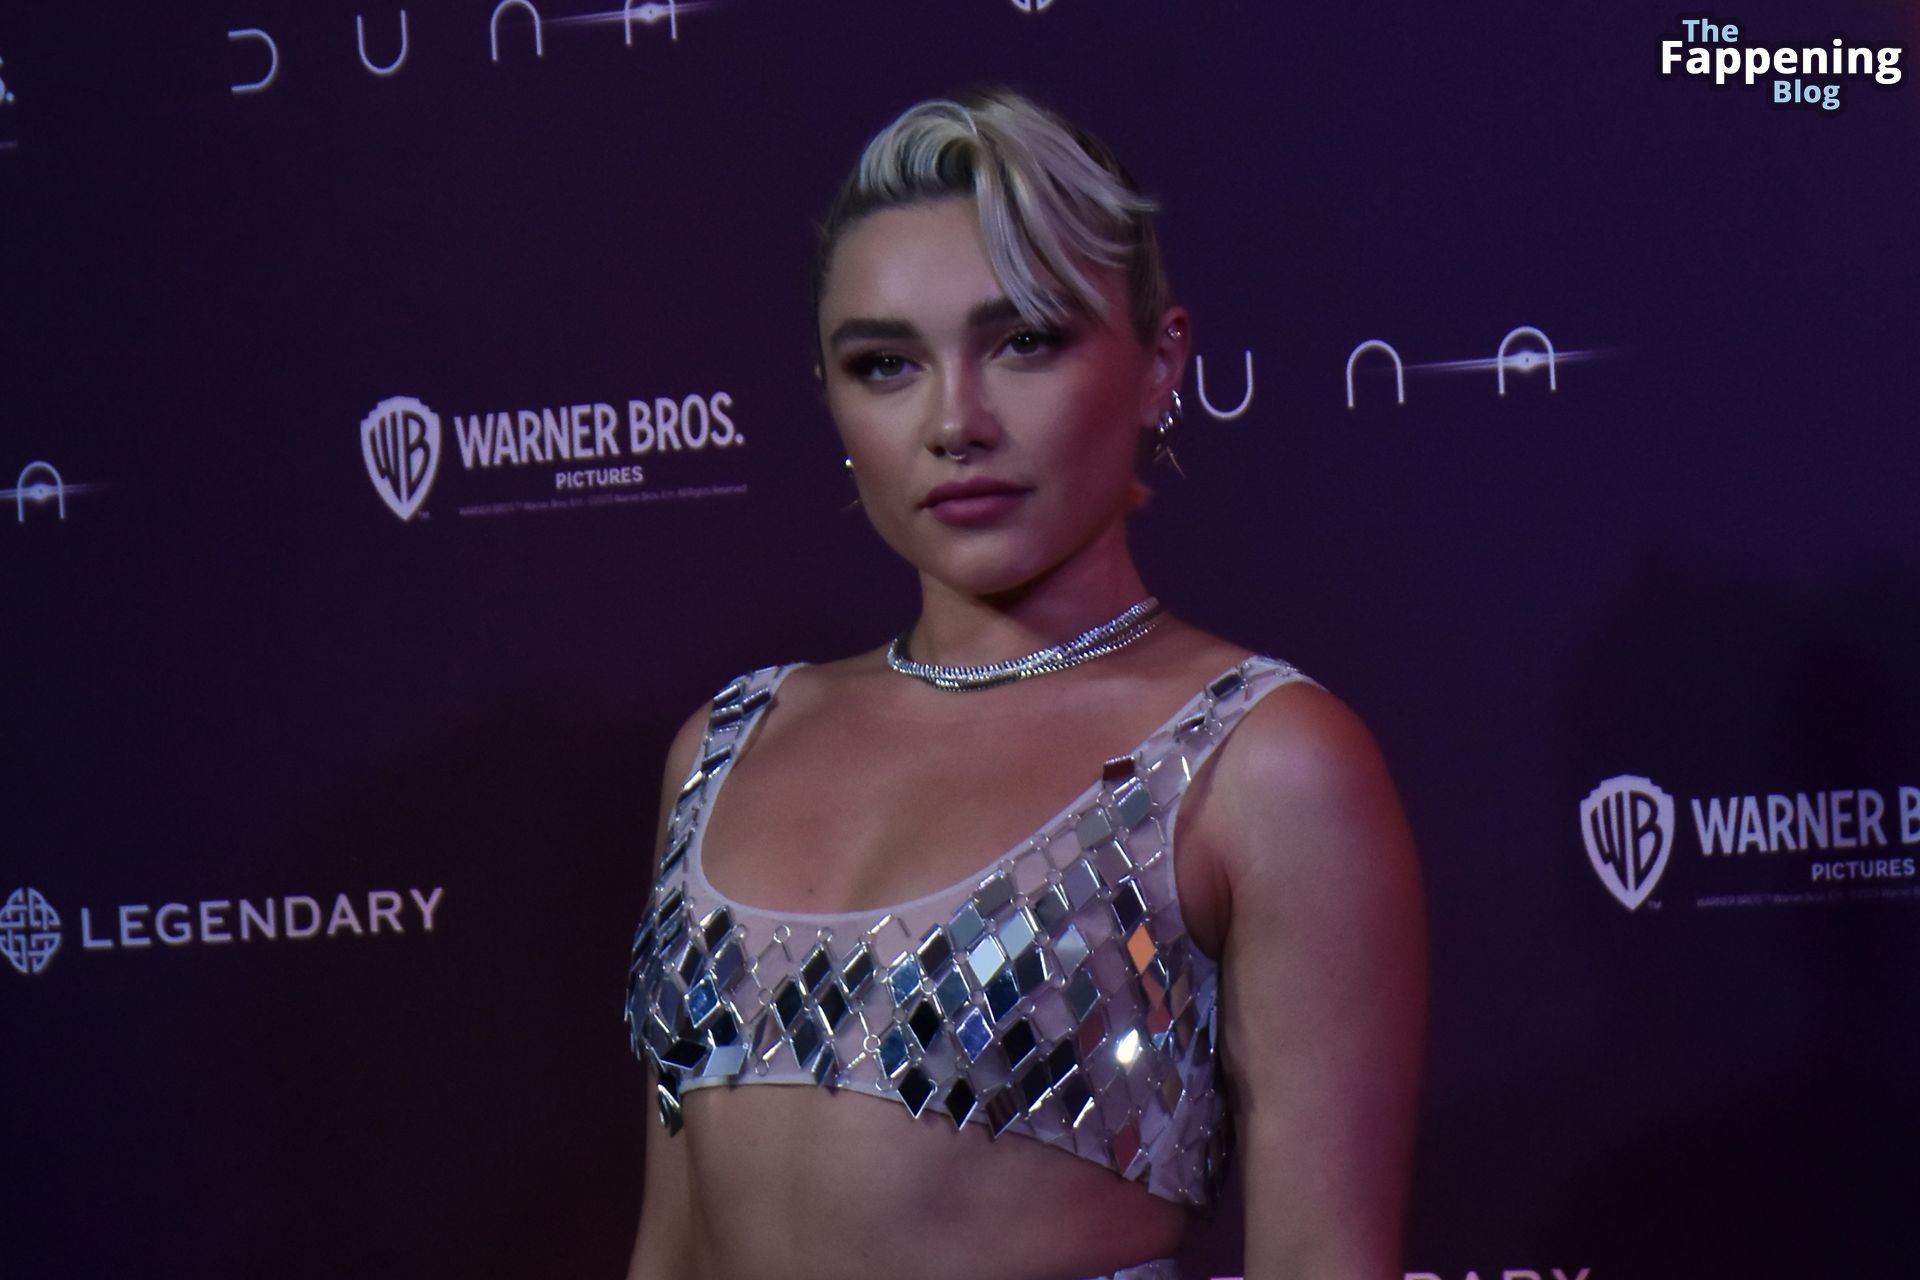 Florence-Pugh-Sexy-84-The-Fappening-Blog.jpg